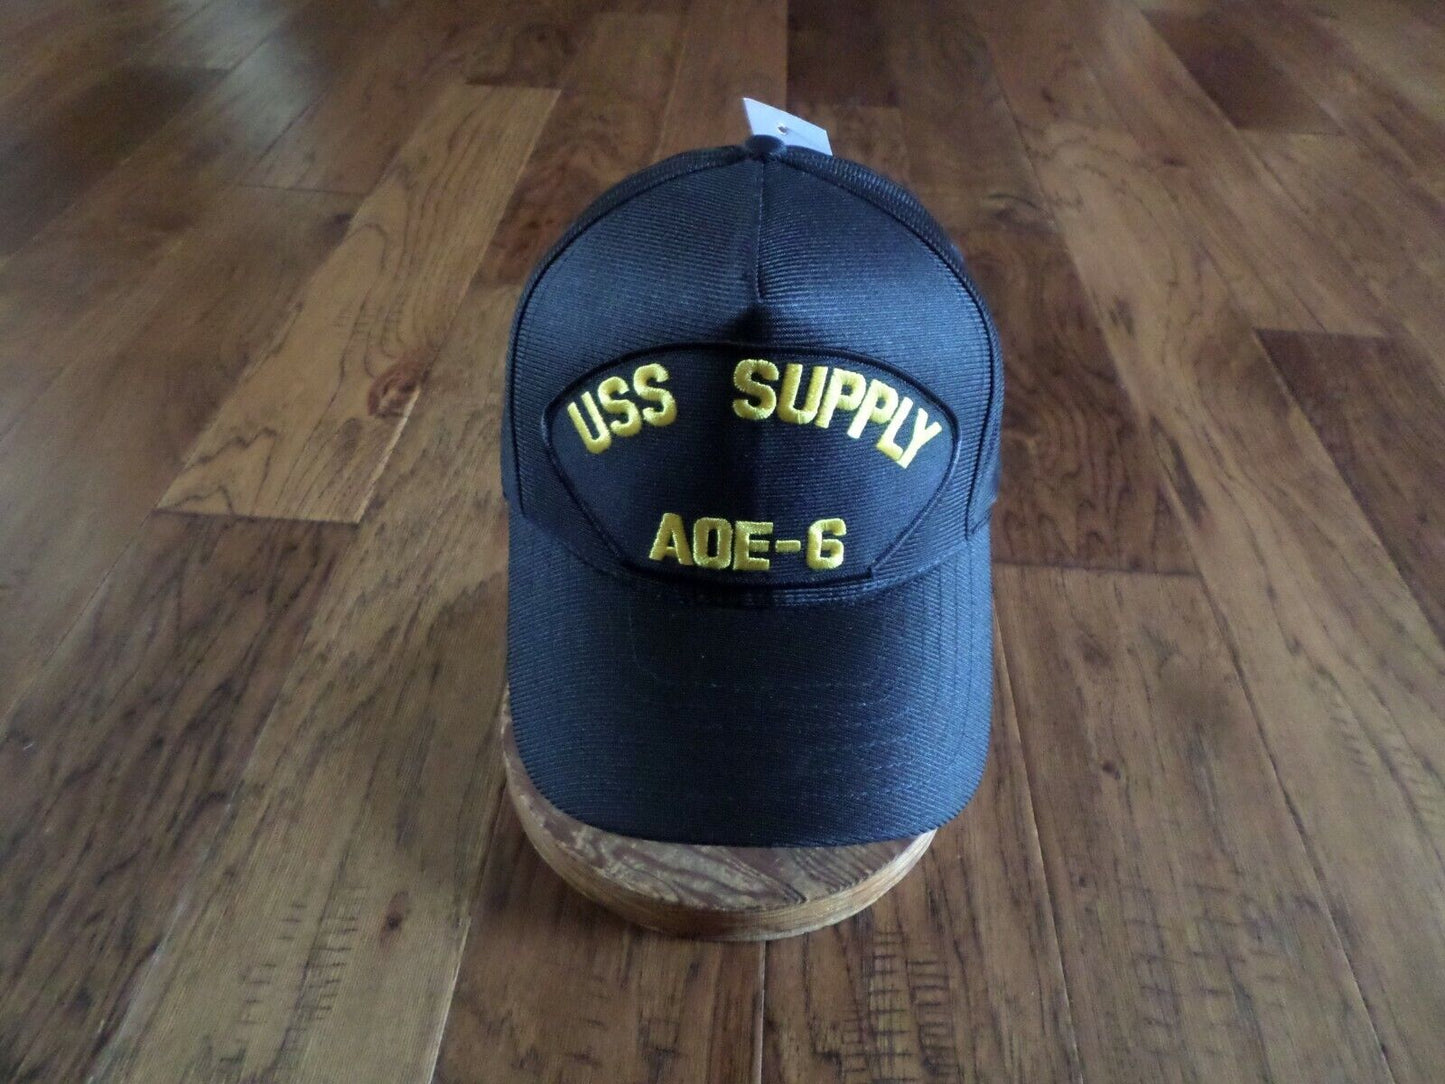 USS SUPPLY AOE-6 COMBAT SUPPORT NAVY SHIP HAT OFFICIAL MILITARY BALL CAP USA